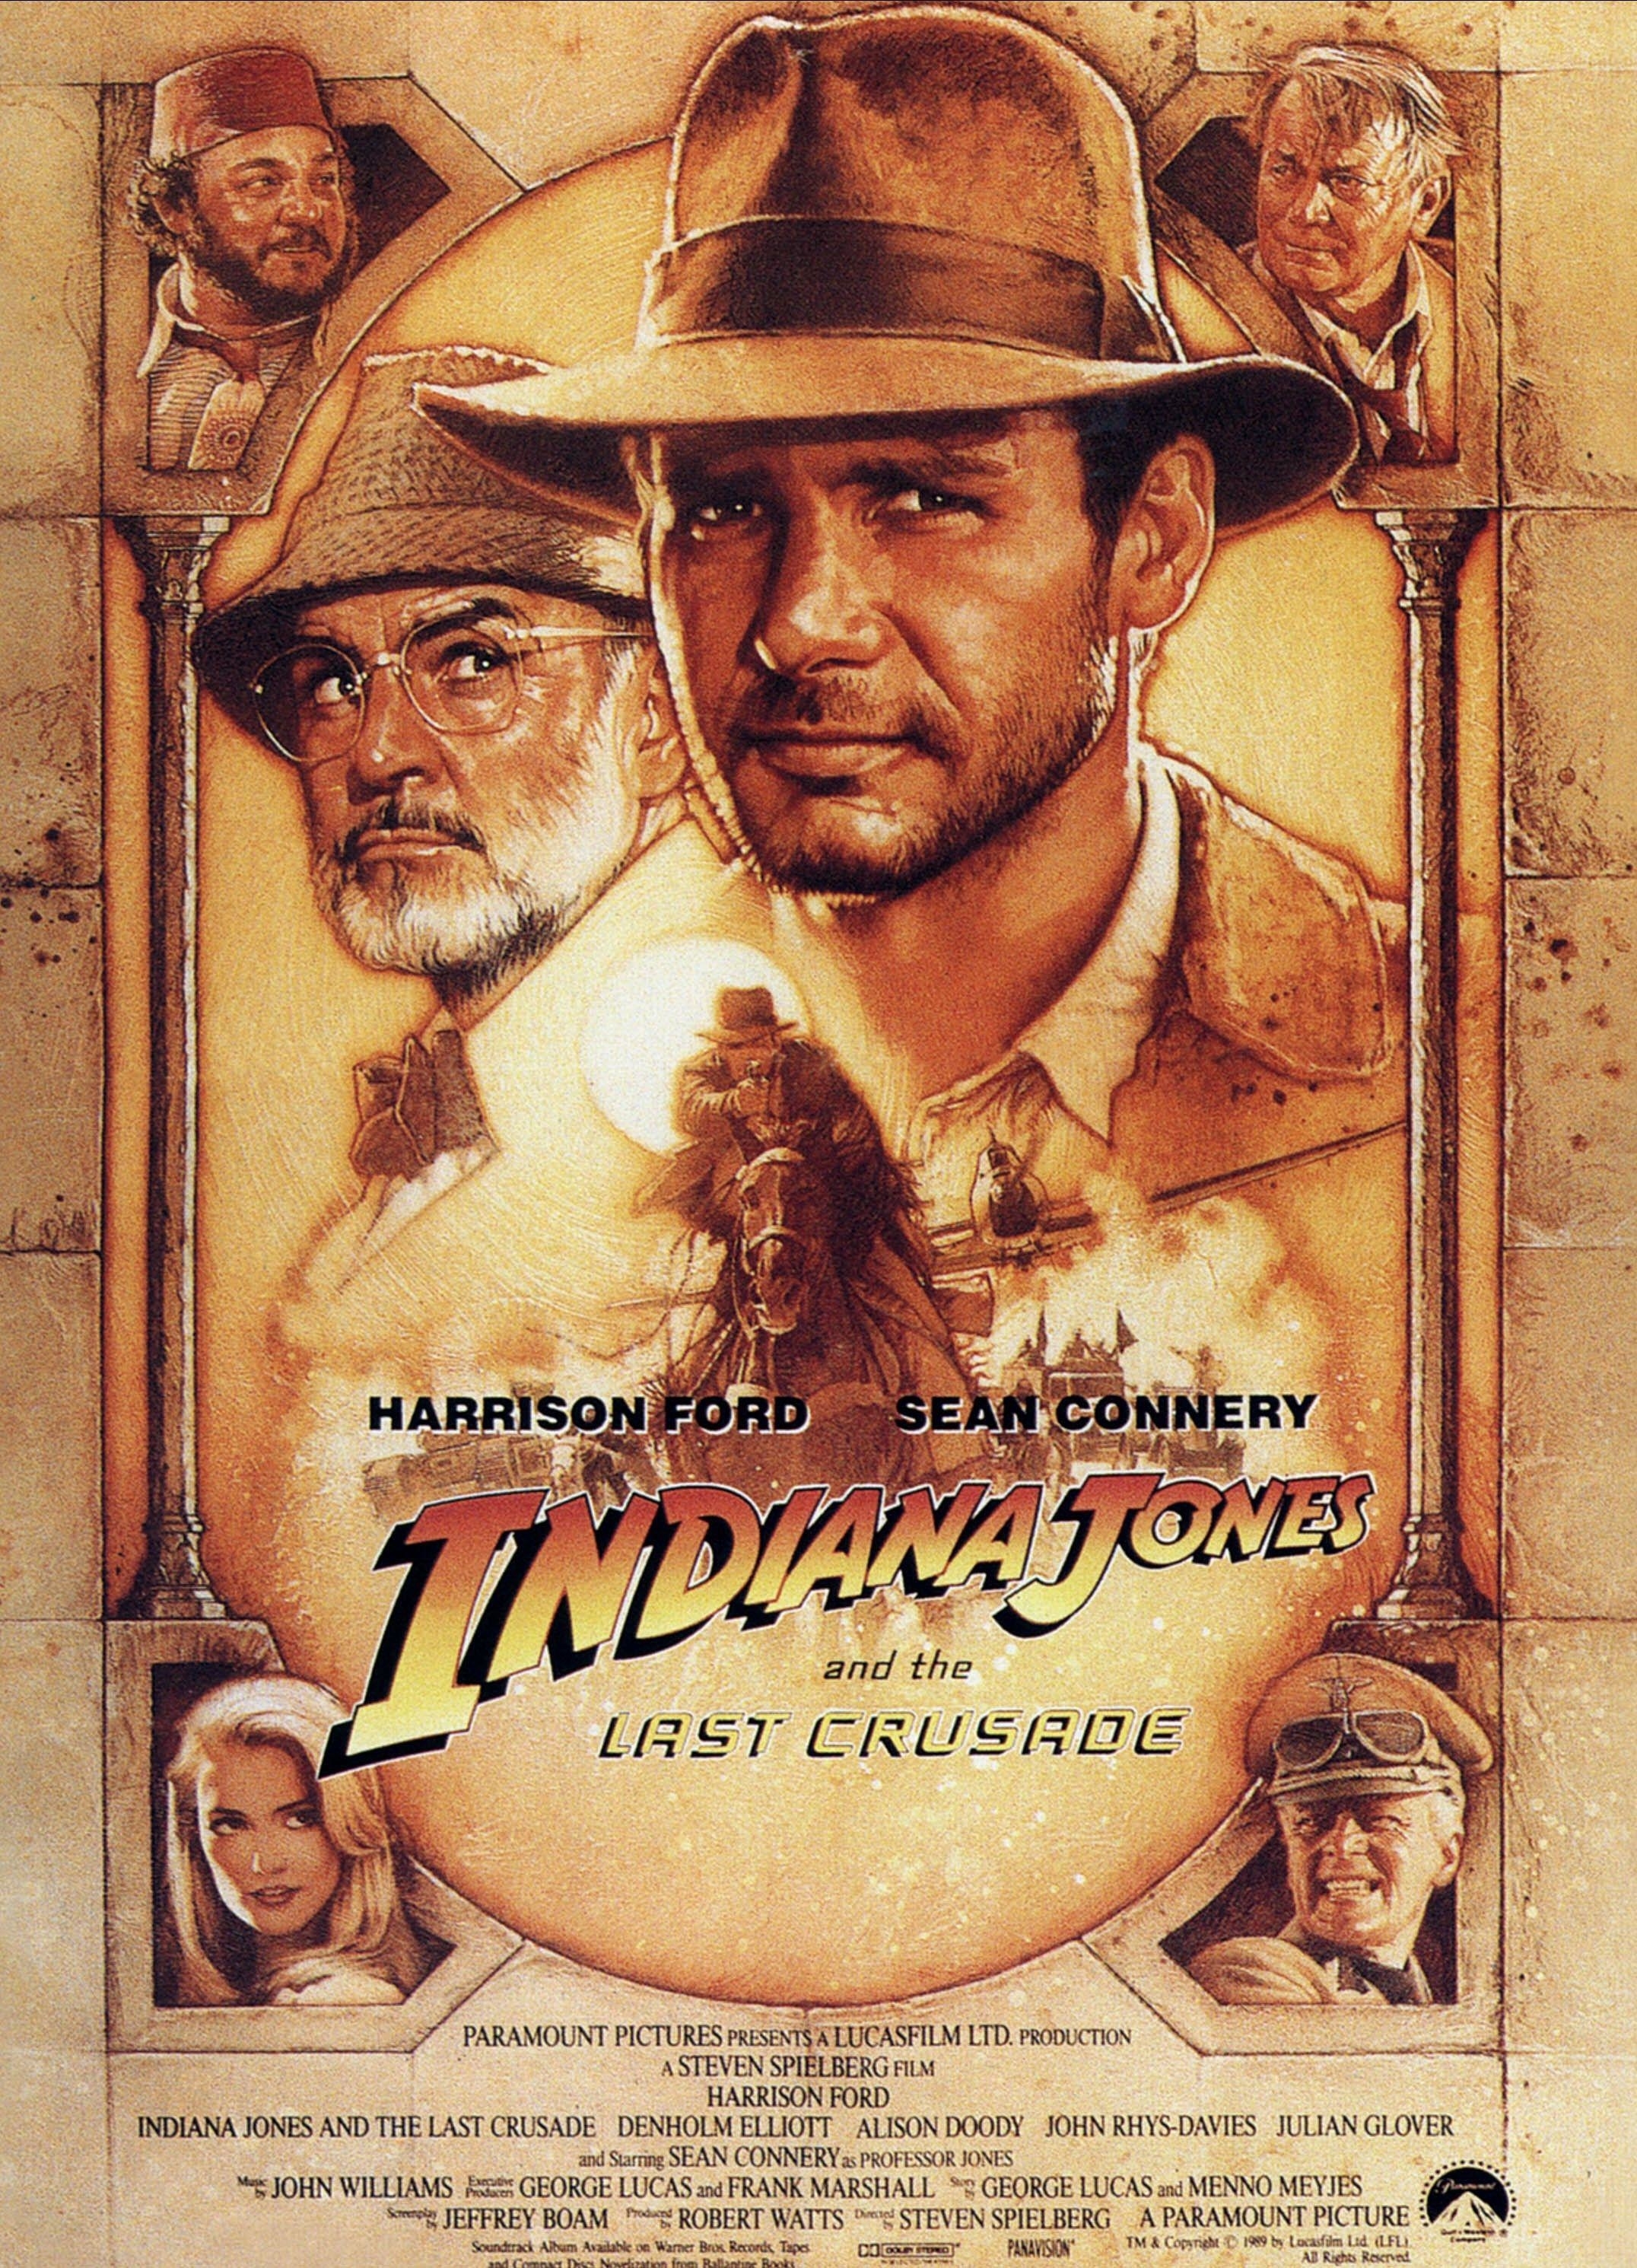 Harrison Ford and Sean Connery are painted on the Indiana Jones and the Last Crusade movie poster.